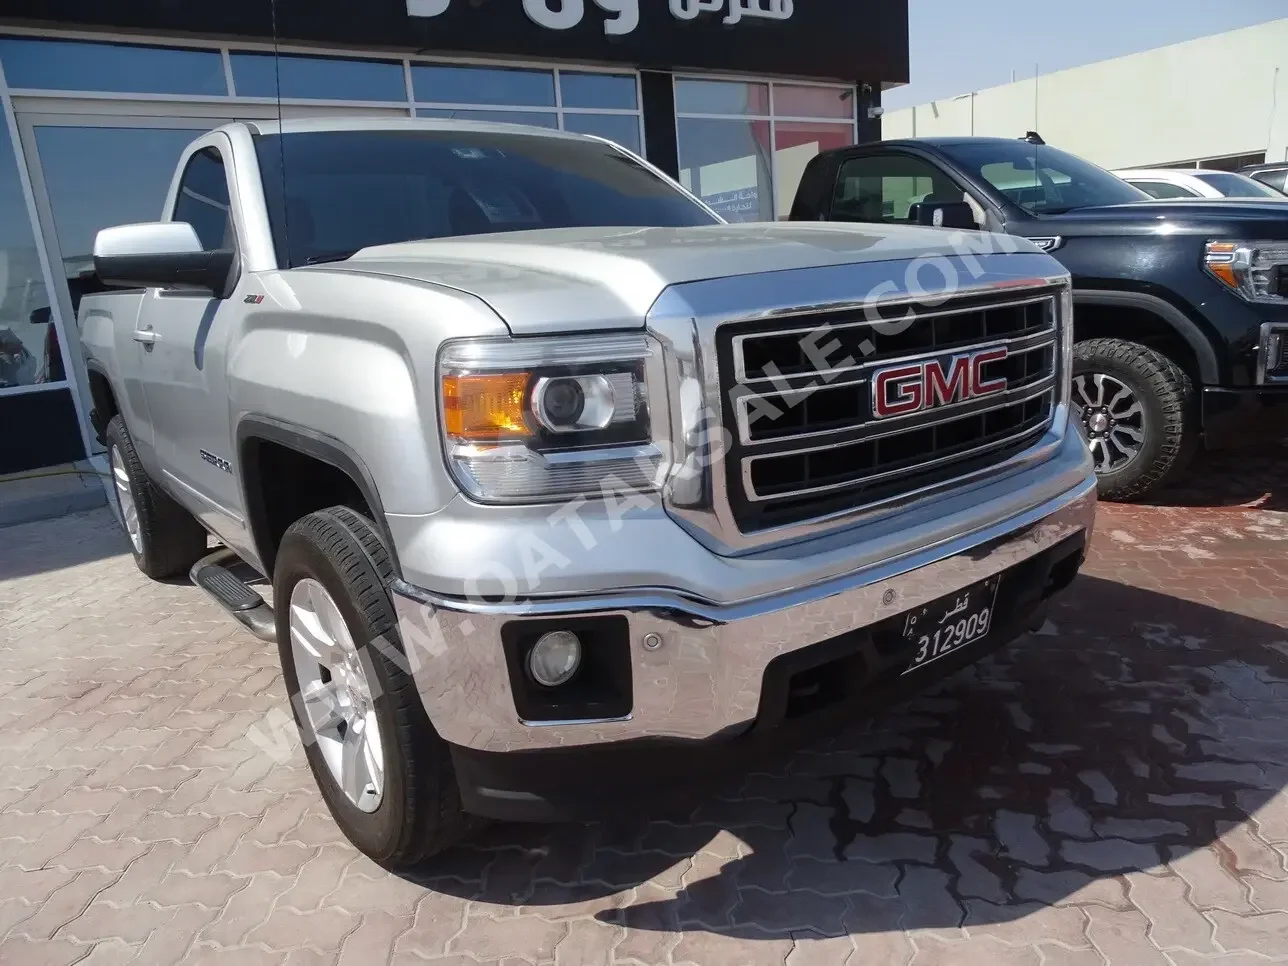 GMC  Sierra  SLE  2014  Automatic  186,000 Km  8 Cylinder  Four Wheel Drive (4WD)  Pick Up  Silver